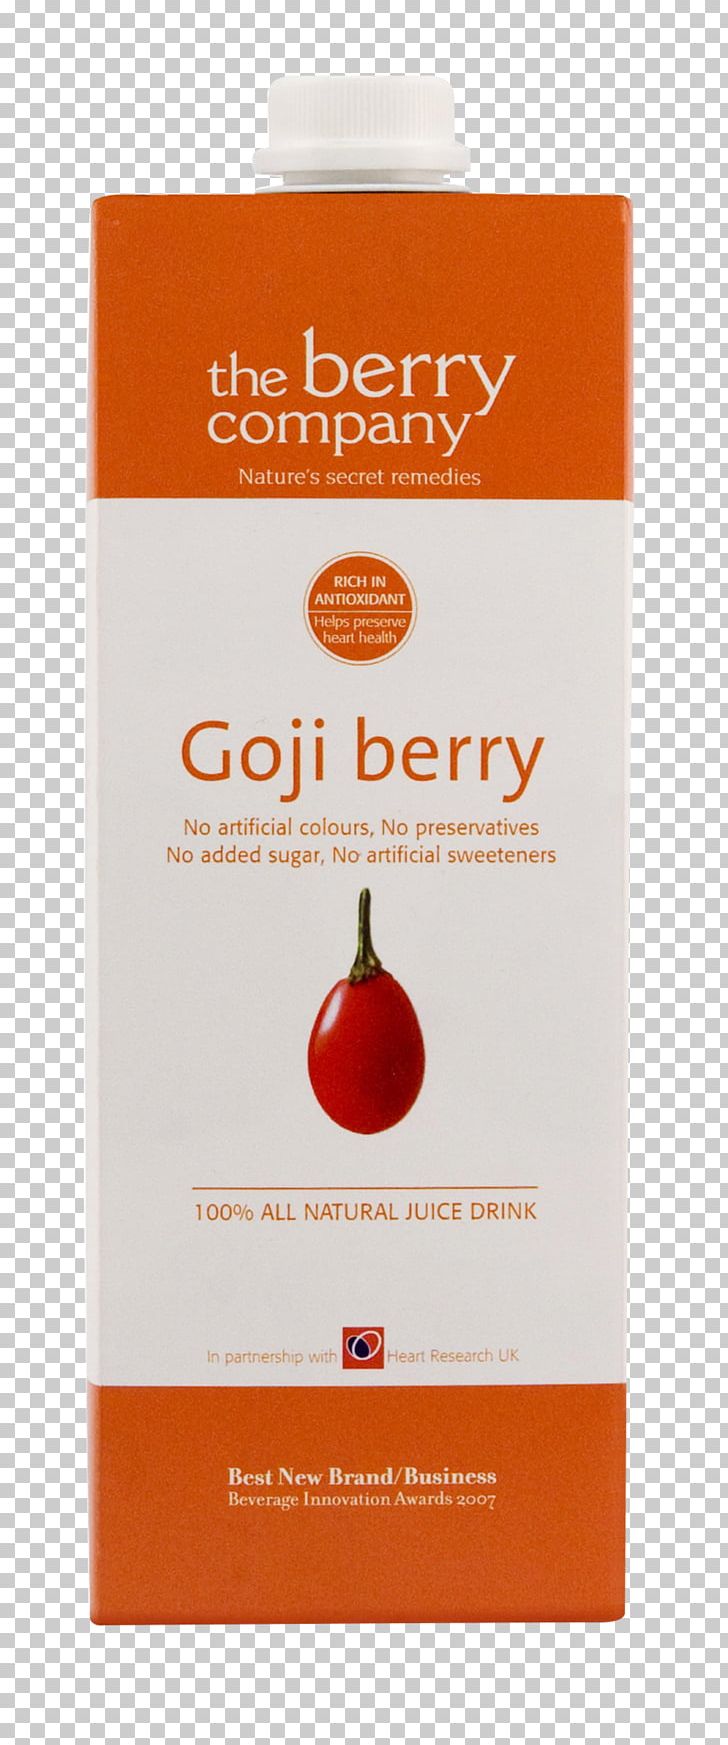 Juice Fruit Goji Berry Blackcurrant PNG, Clipart, Acai Palm, Berry, Blackcurrant, Blueberry, Company Free PNG Download